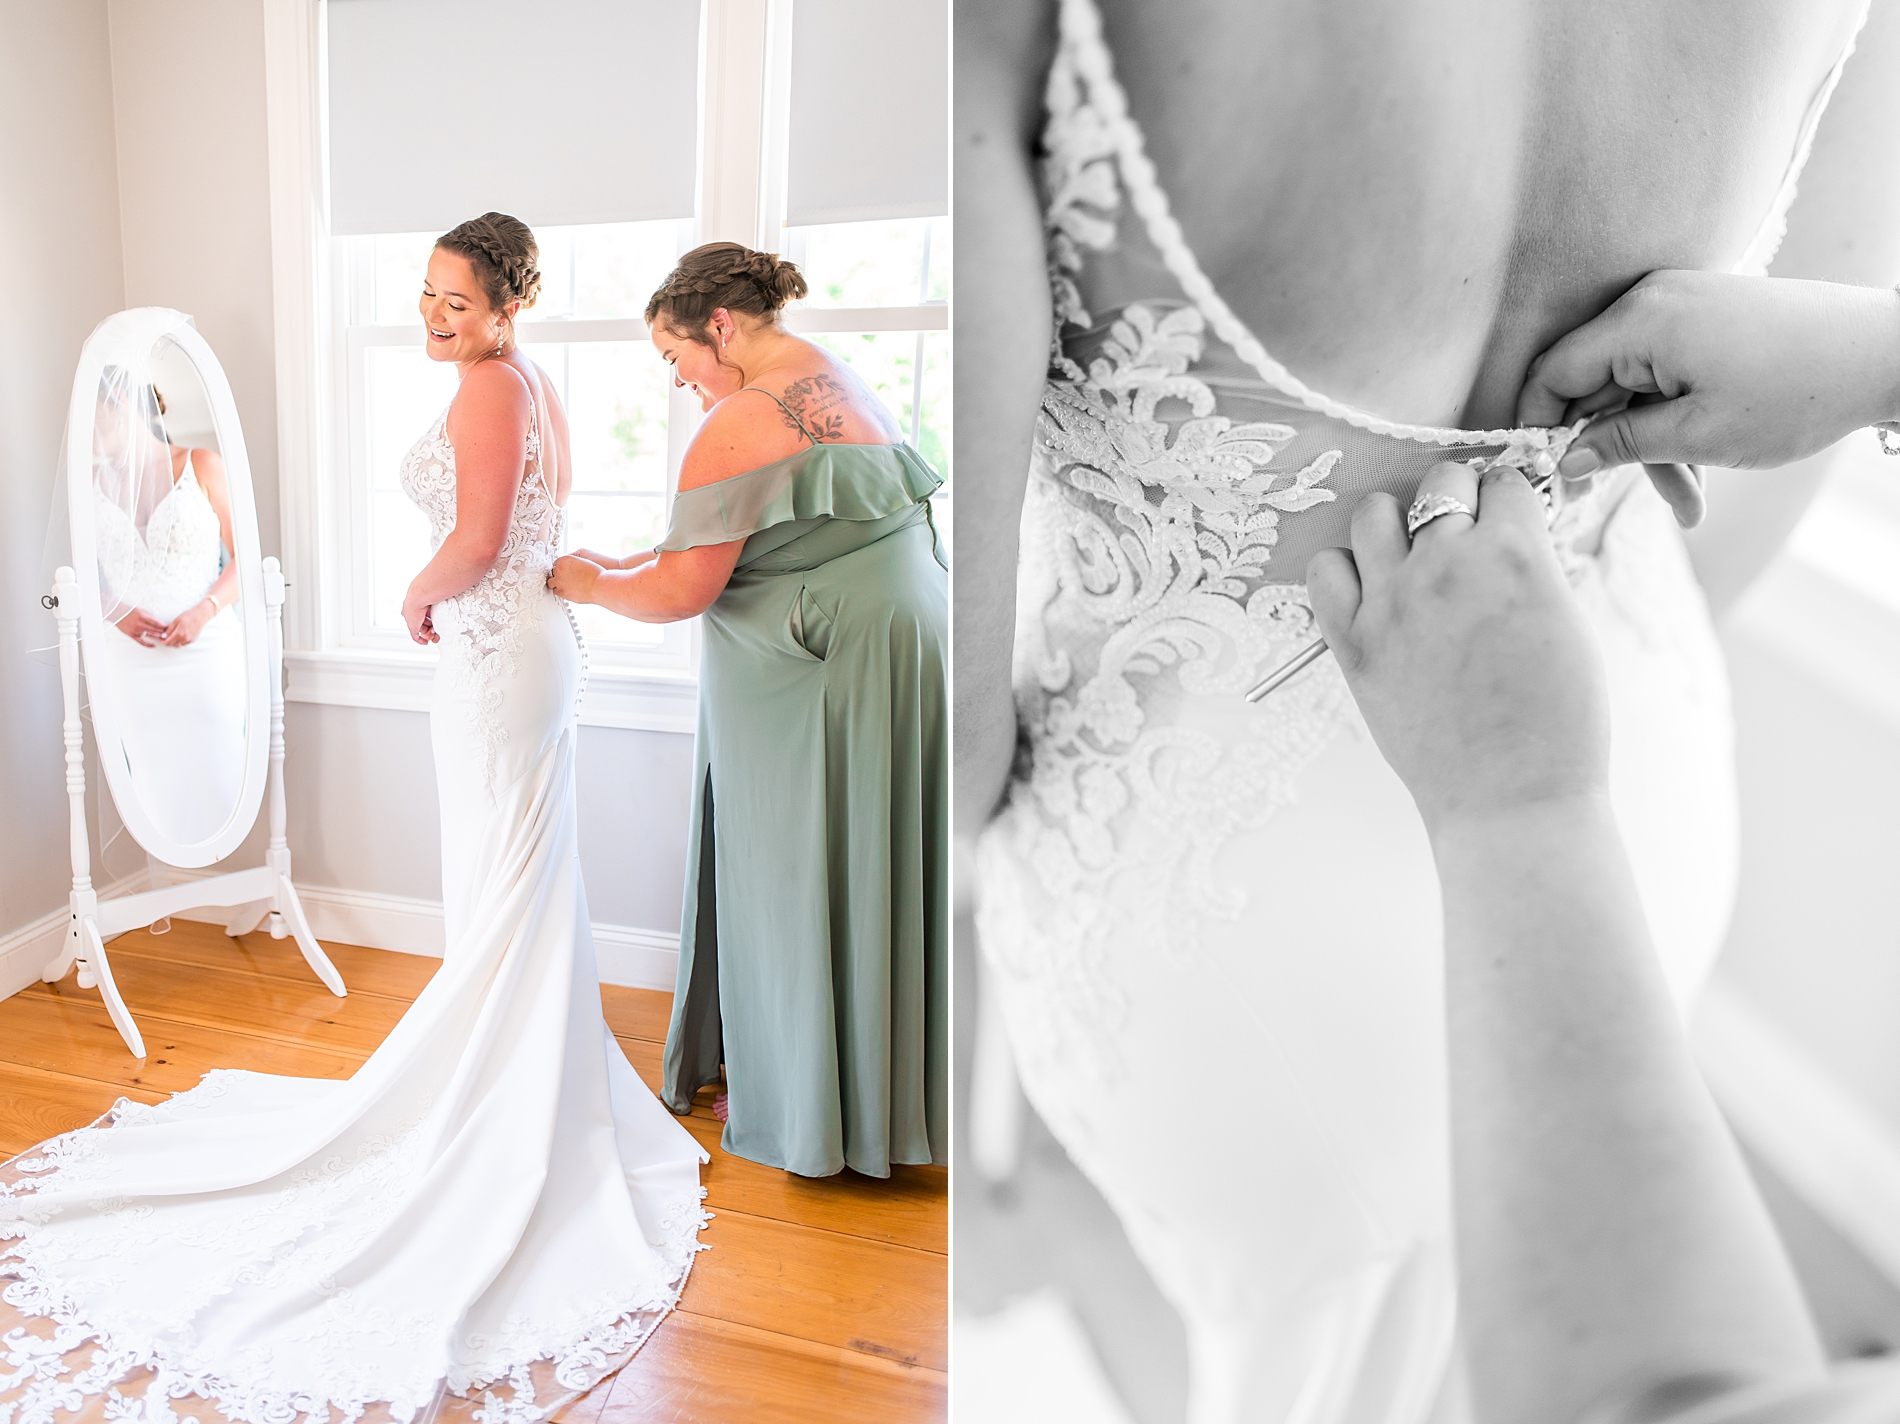 bride getting her dress buttoned up with the help of a bridesmaid